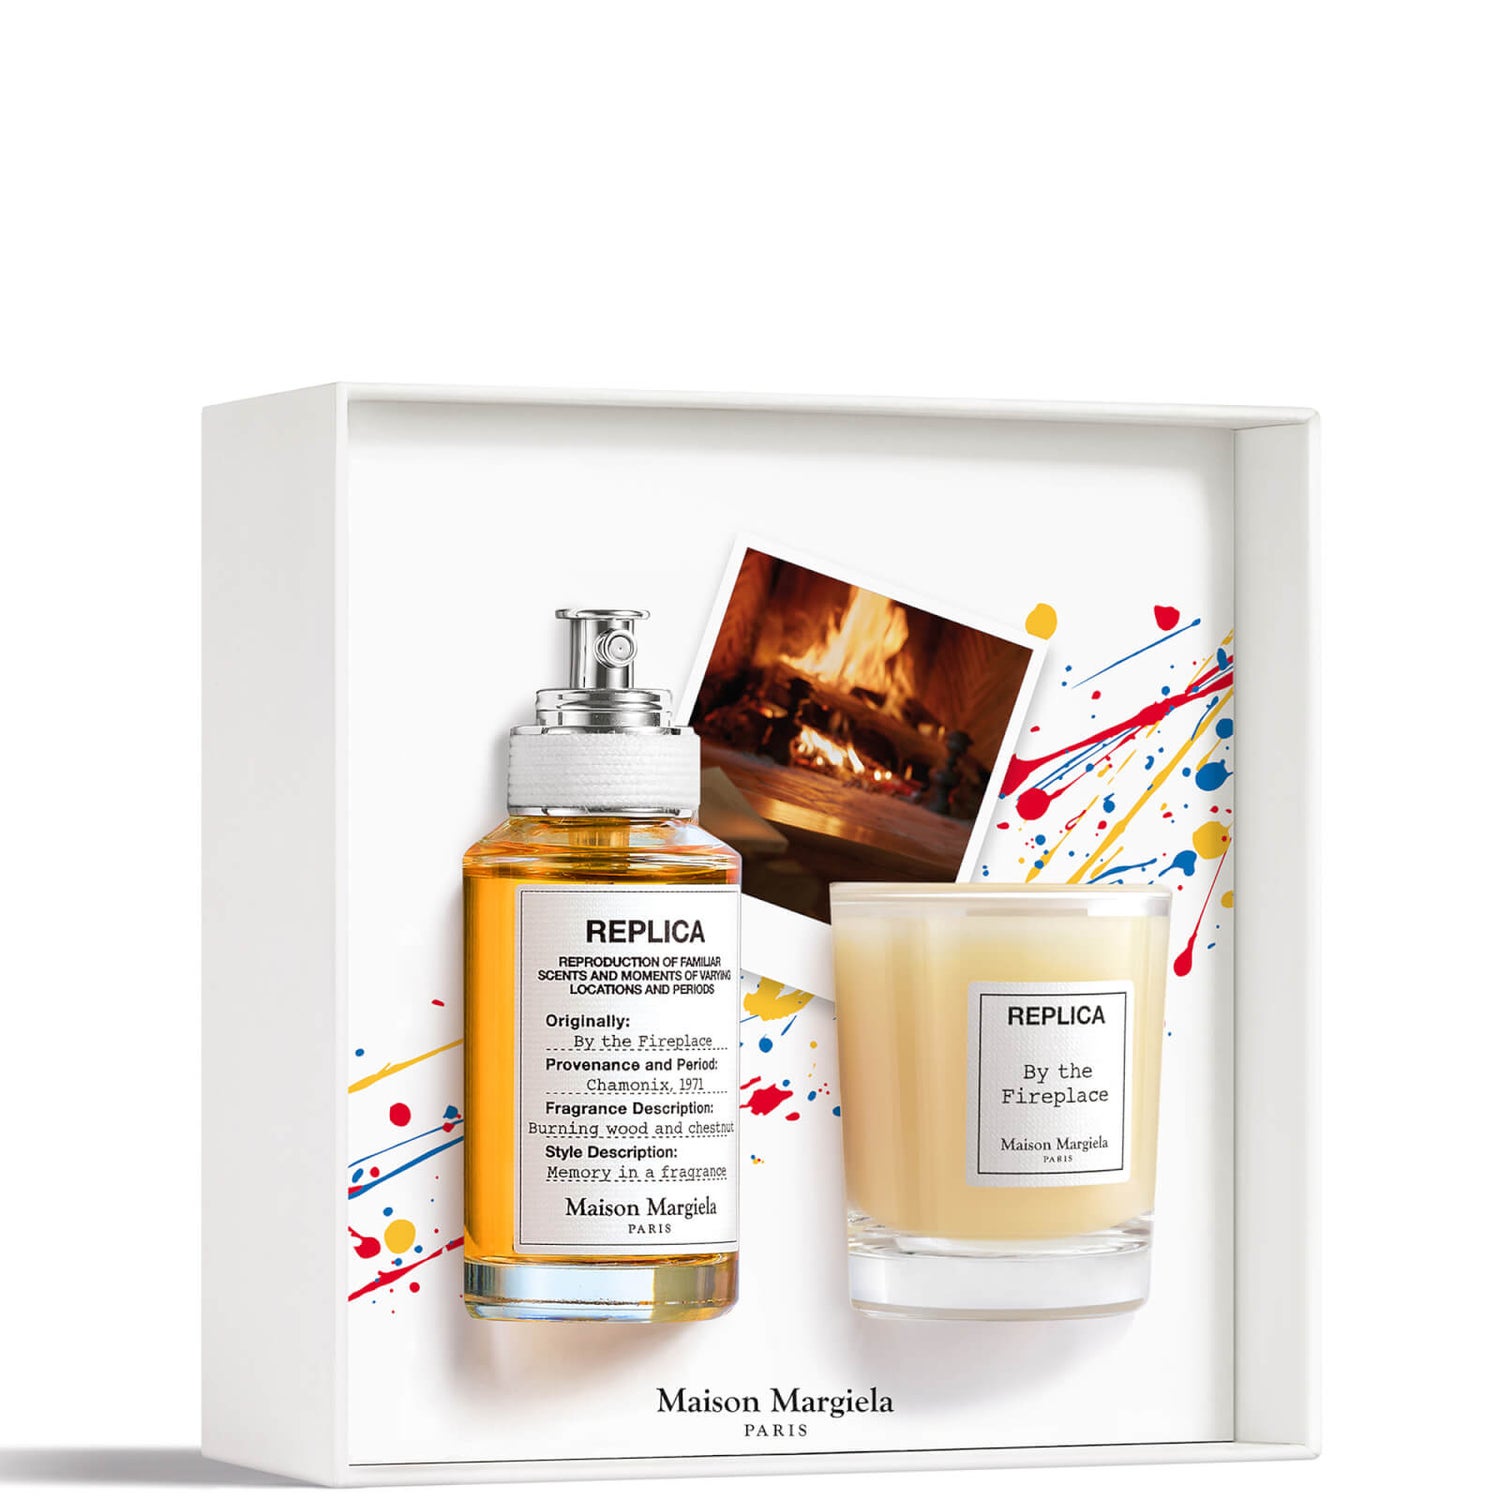 Maison Margiela Replica By the Fireplace 30ml Eau De Toilette and By the Fireplace Candle 35g